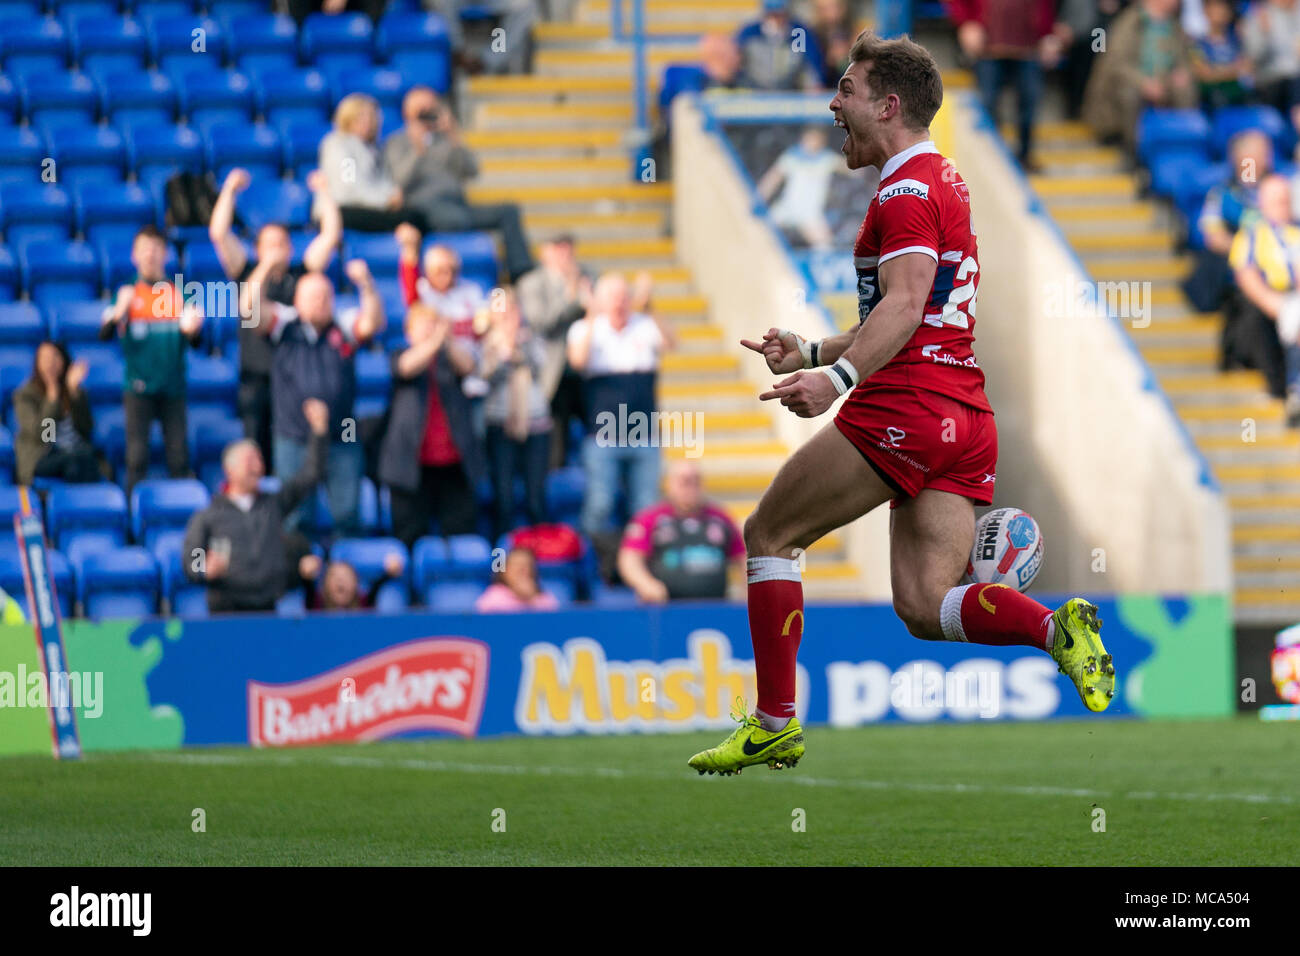 Hull's Chris Atkin celebrates scoring  a try  14th April 2018 , The Halliwell Jones Stadium Mike Gregory Way, Warrington, WA2 7NE, England;  Betfred Super League rugby, Round 11, Warrington Wolves v Hull Kingston Rovers Stock Photo